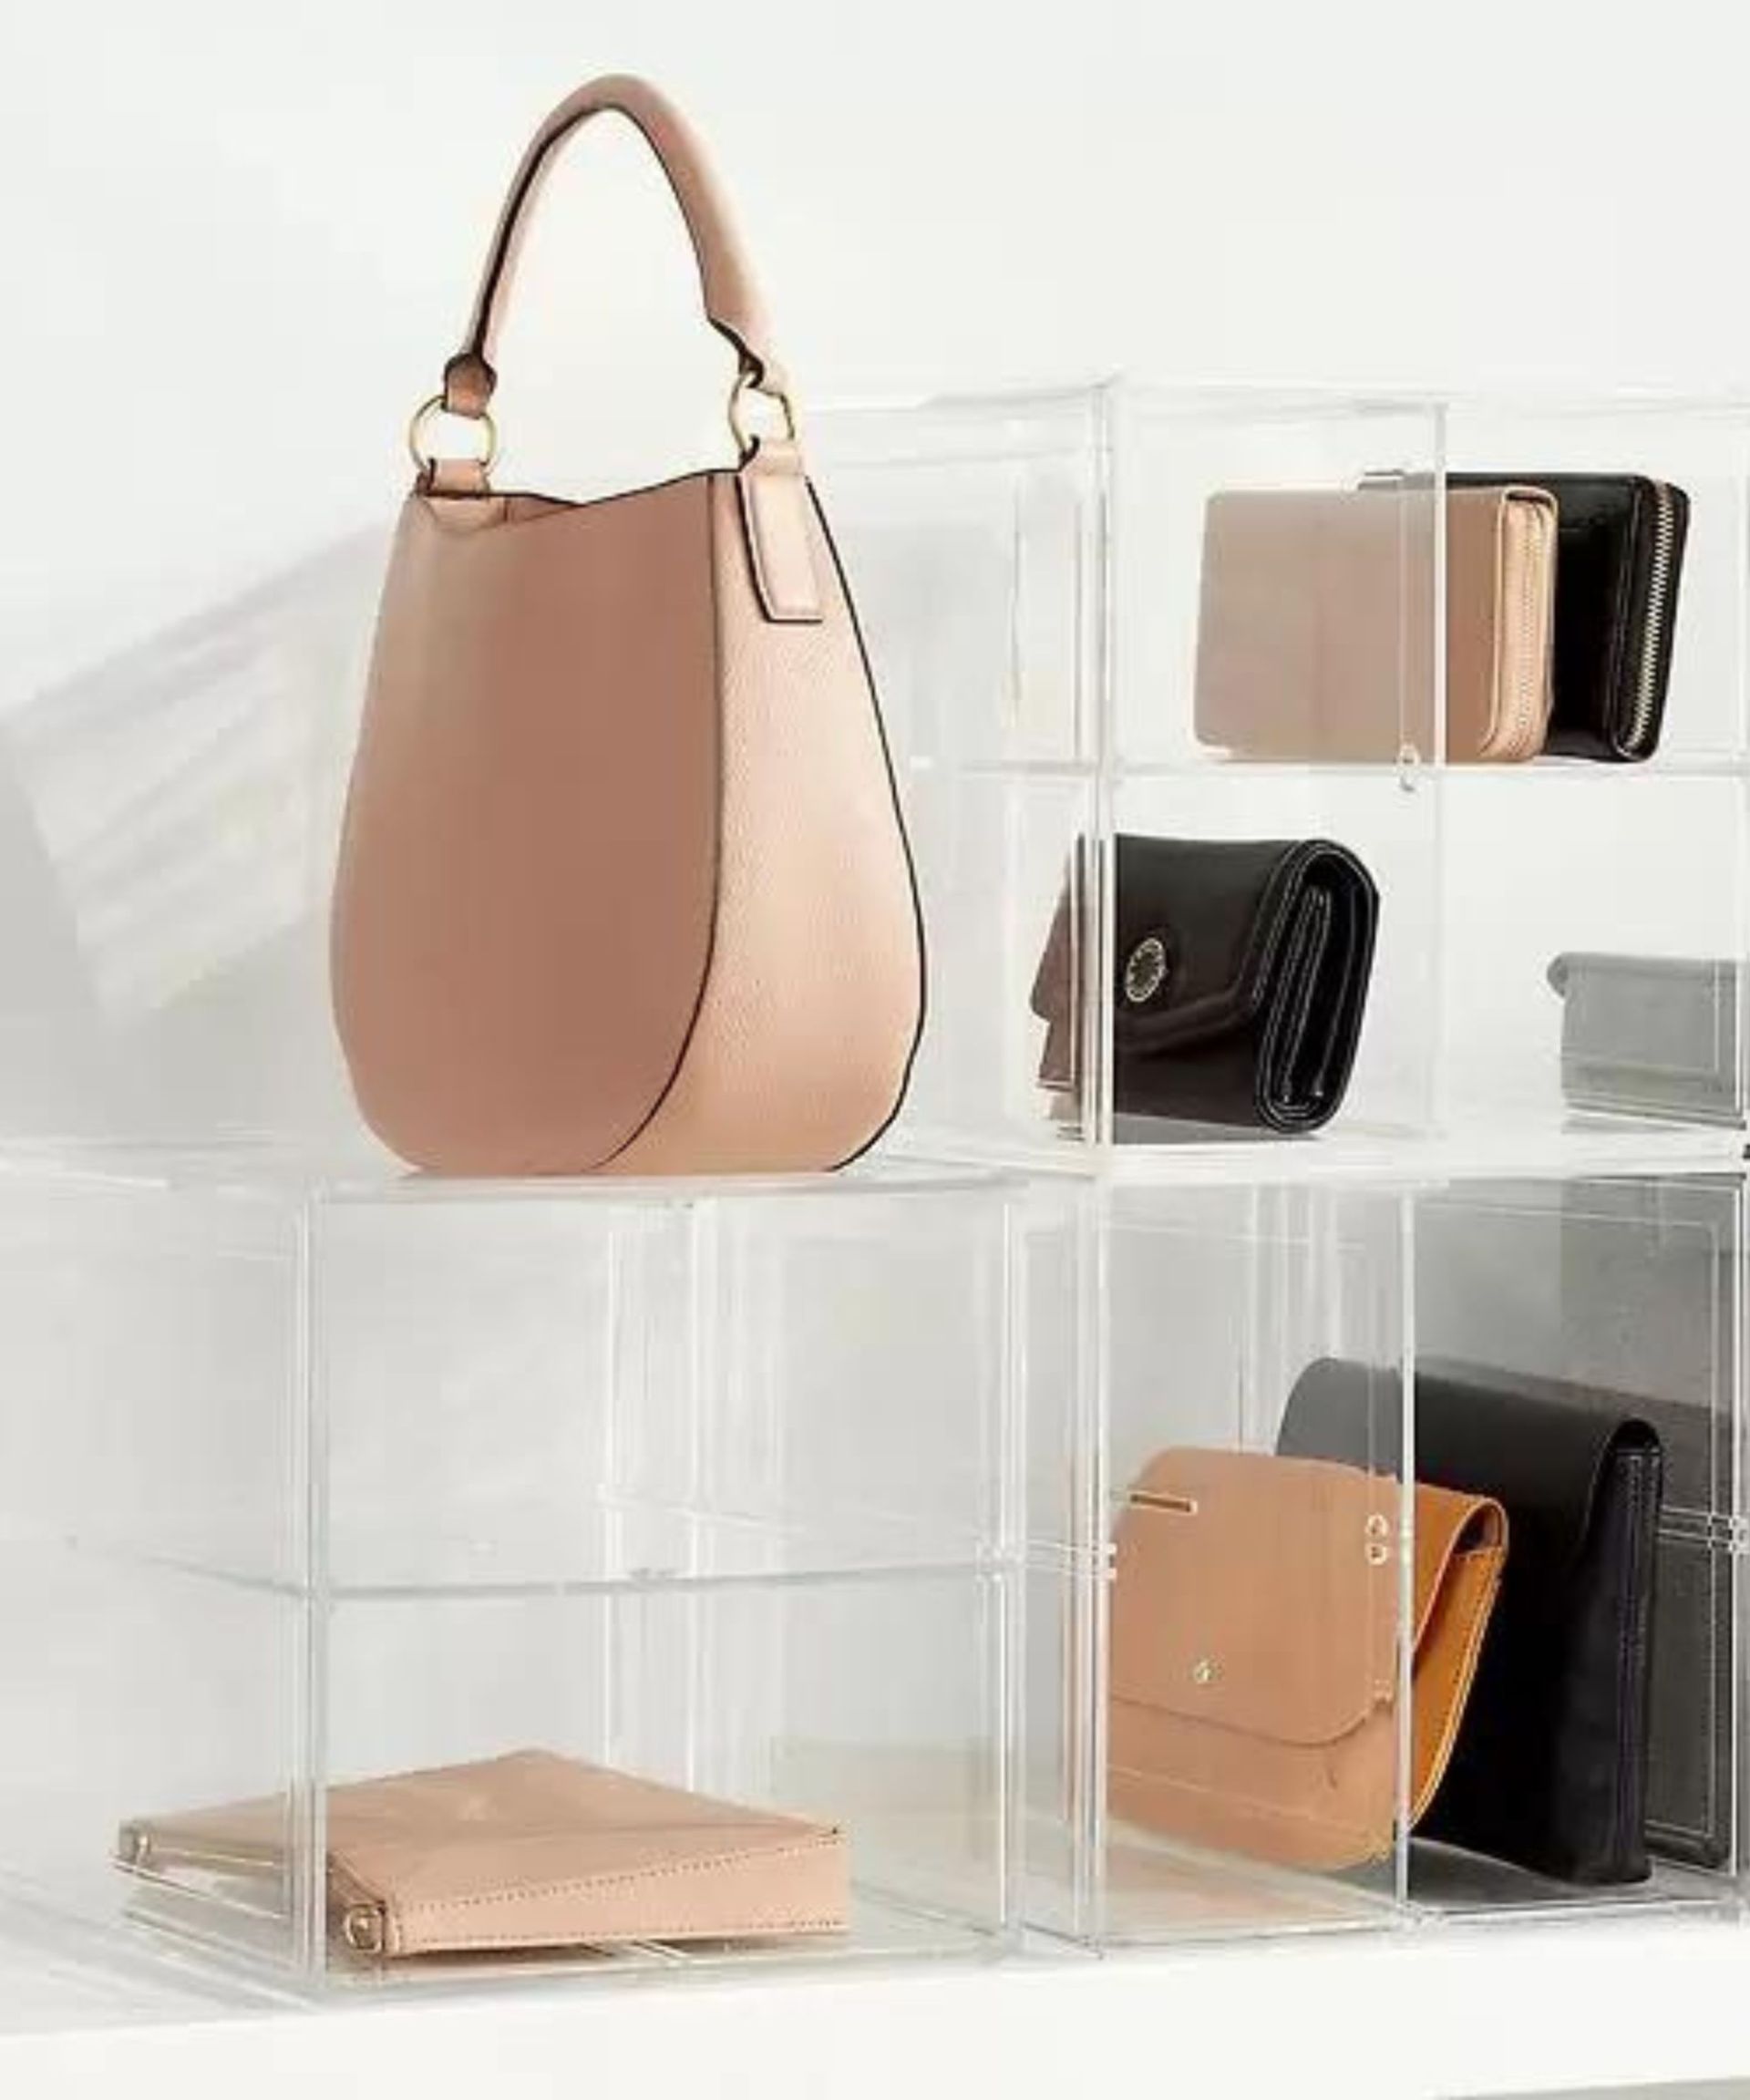 <p>                     One of the best parts about a purse is how pretty they look even when not in use. While we often like to hide our closet contents away to prevent visual clutter, you may want to keep your purses in pride of place. Using a cube divider like this one pictured from The Container Store can help to add height to your purses and display them in levels for visual interest.                     </p>